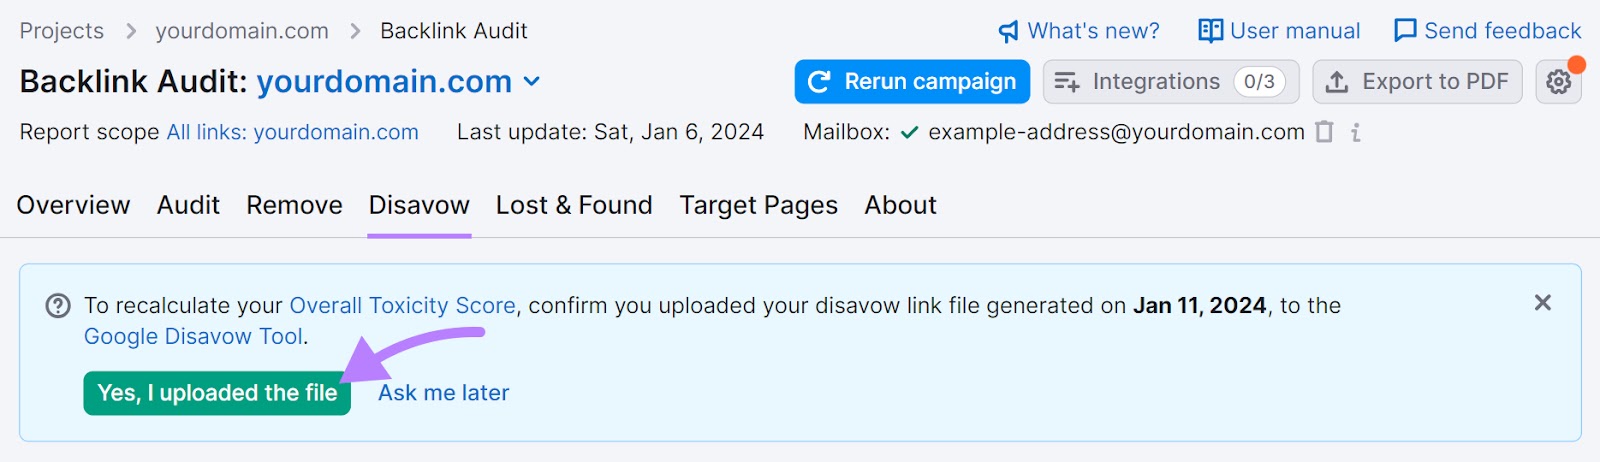 “Yes, I uploaded the file" button highlighted in Backlink Audit tool